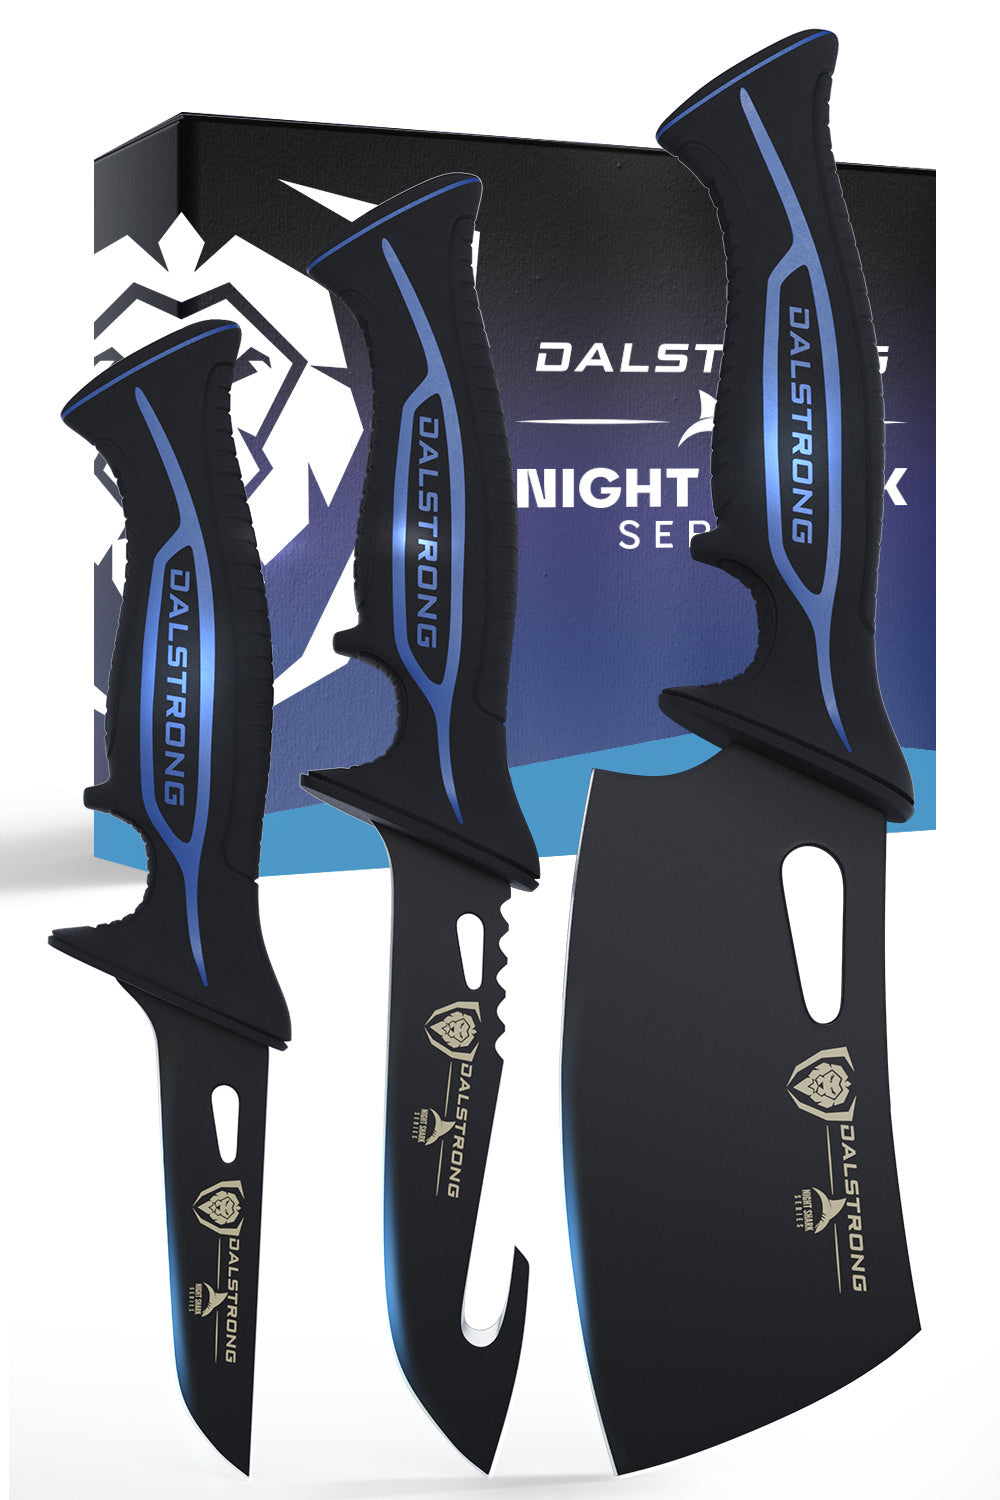 Dalstrong night shark series 3 piece knife set in front of it's premium packaging.